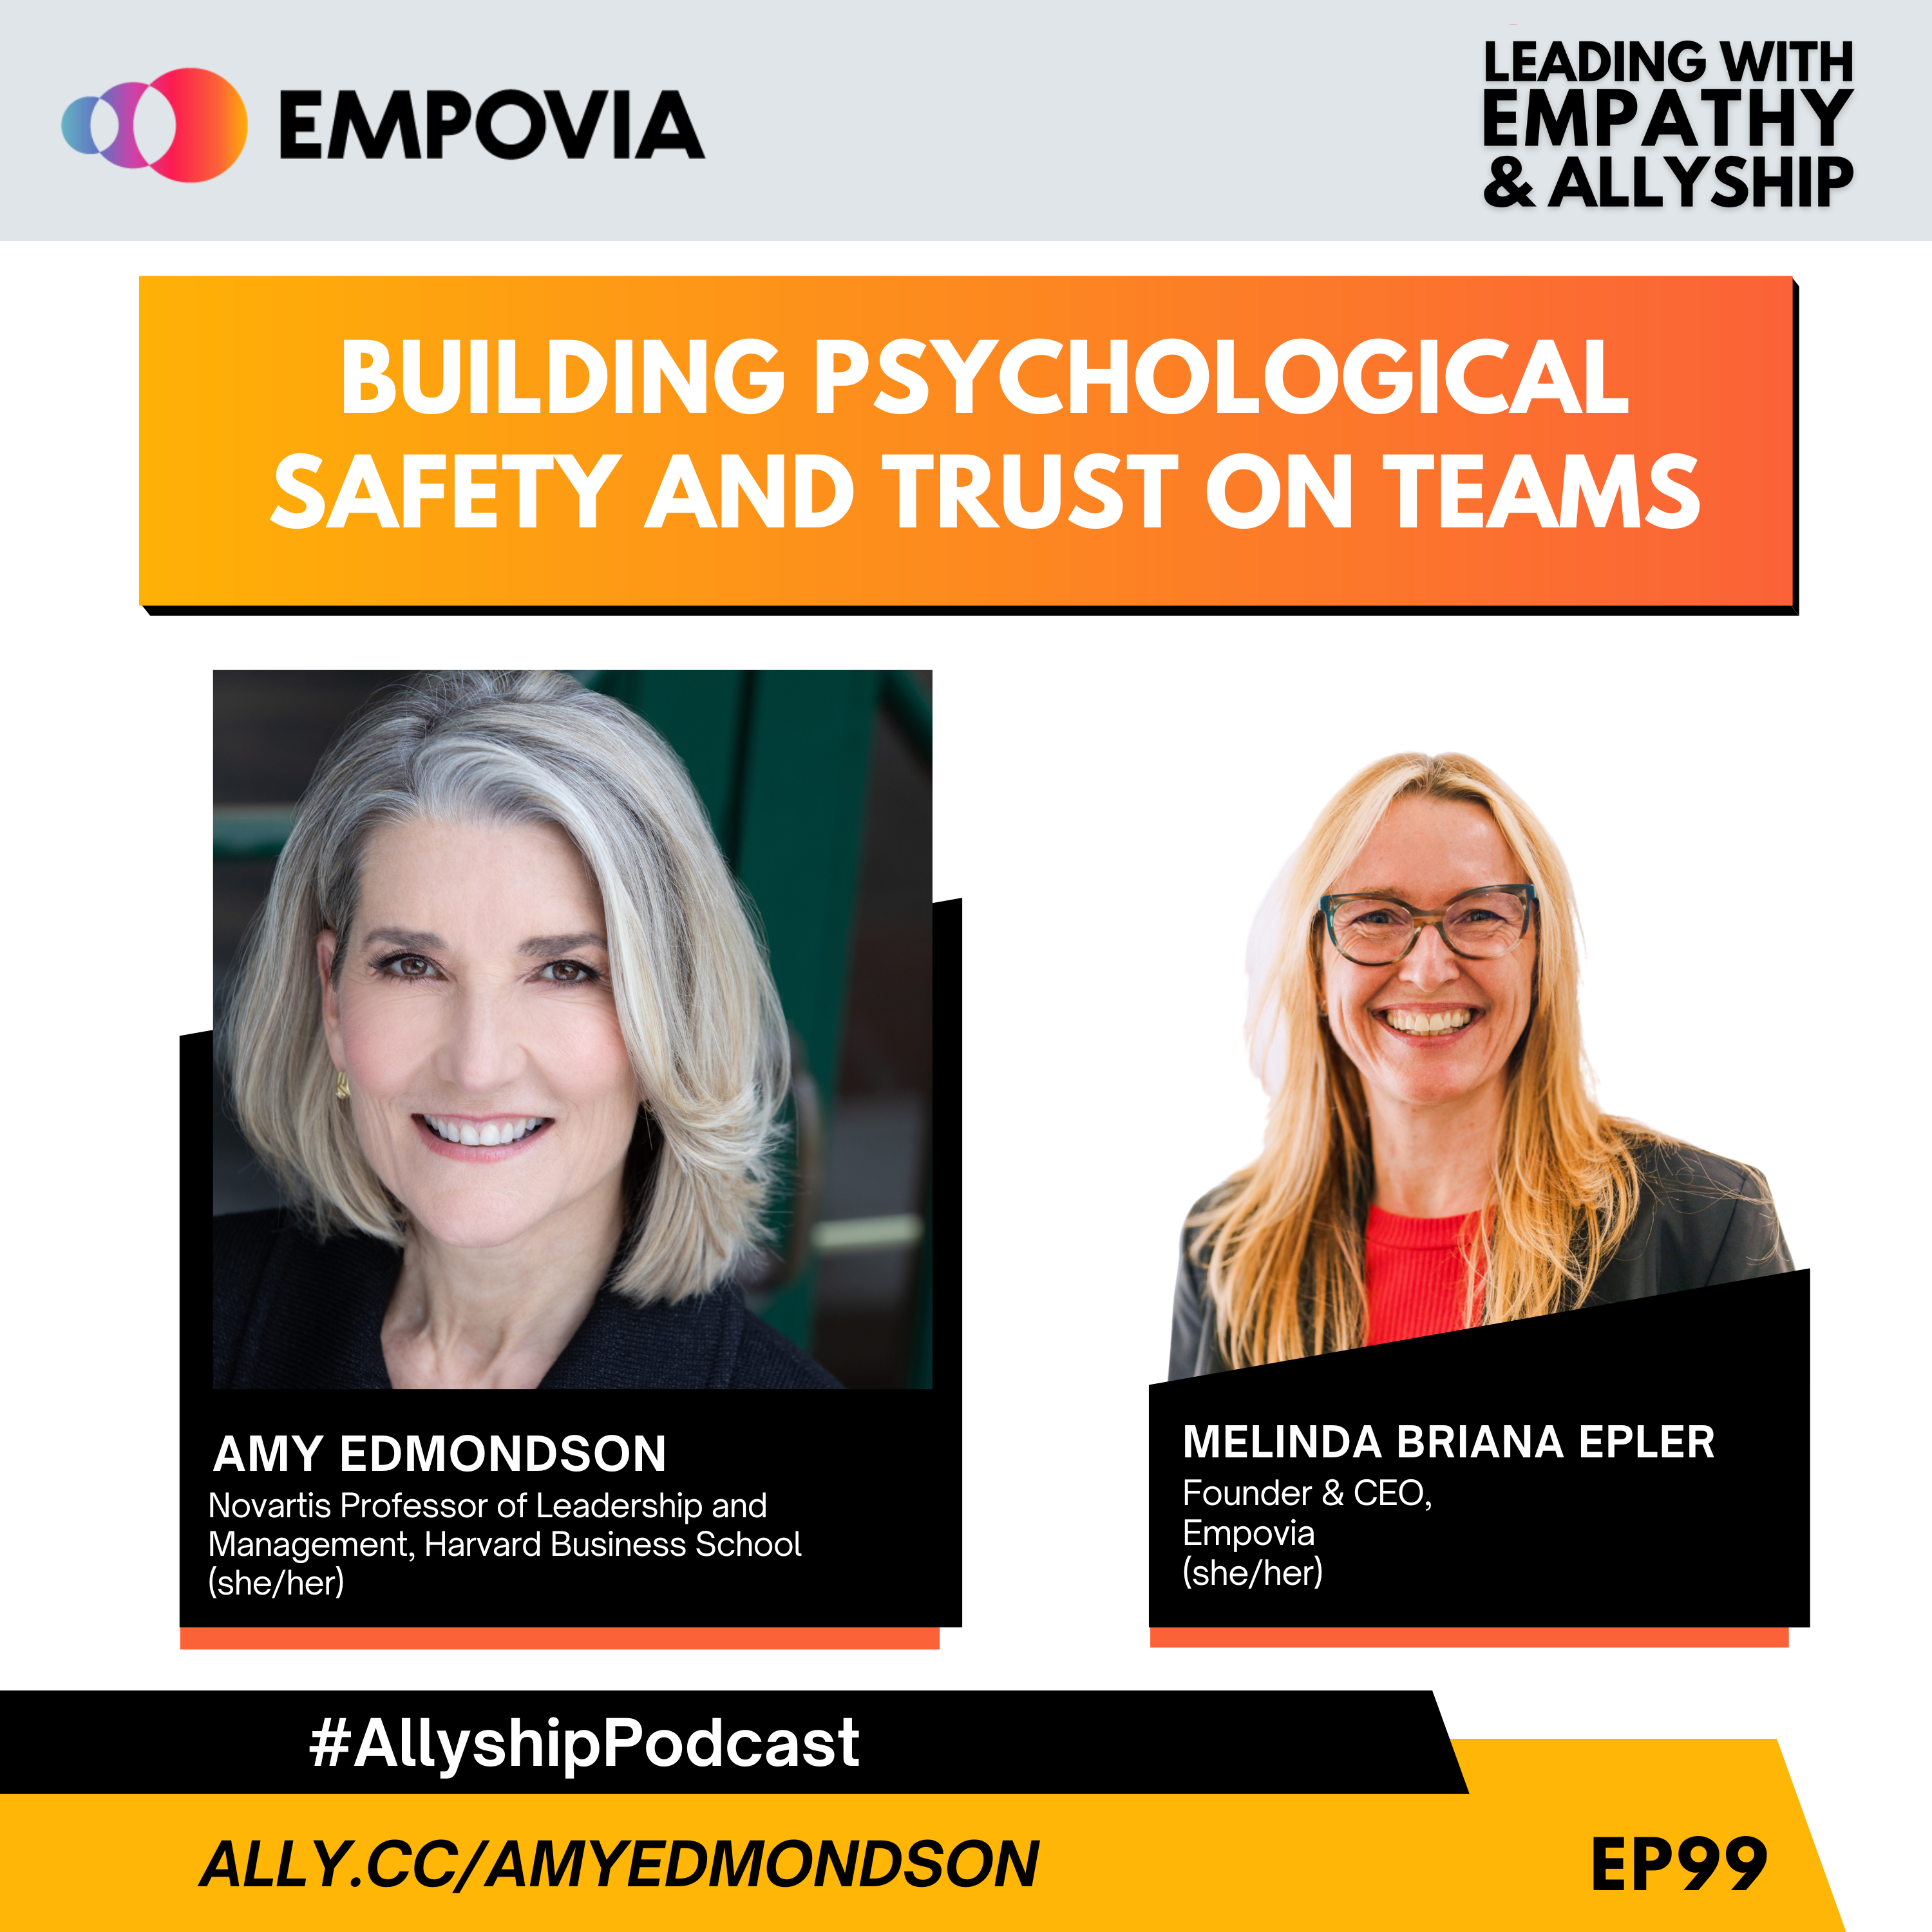 Leading With Empathy & Allyship promo and photos of Amy Edmondson, a White woman with short silver-blonde hair and black blazer; and host Melinda Briana Epler, a White woman with blonde and red hair, glasses, red shirt, and black jacket.